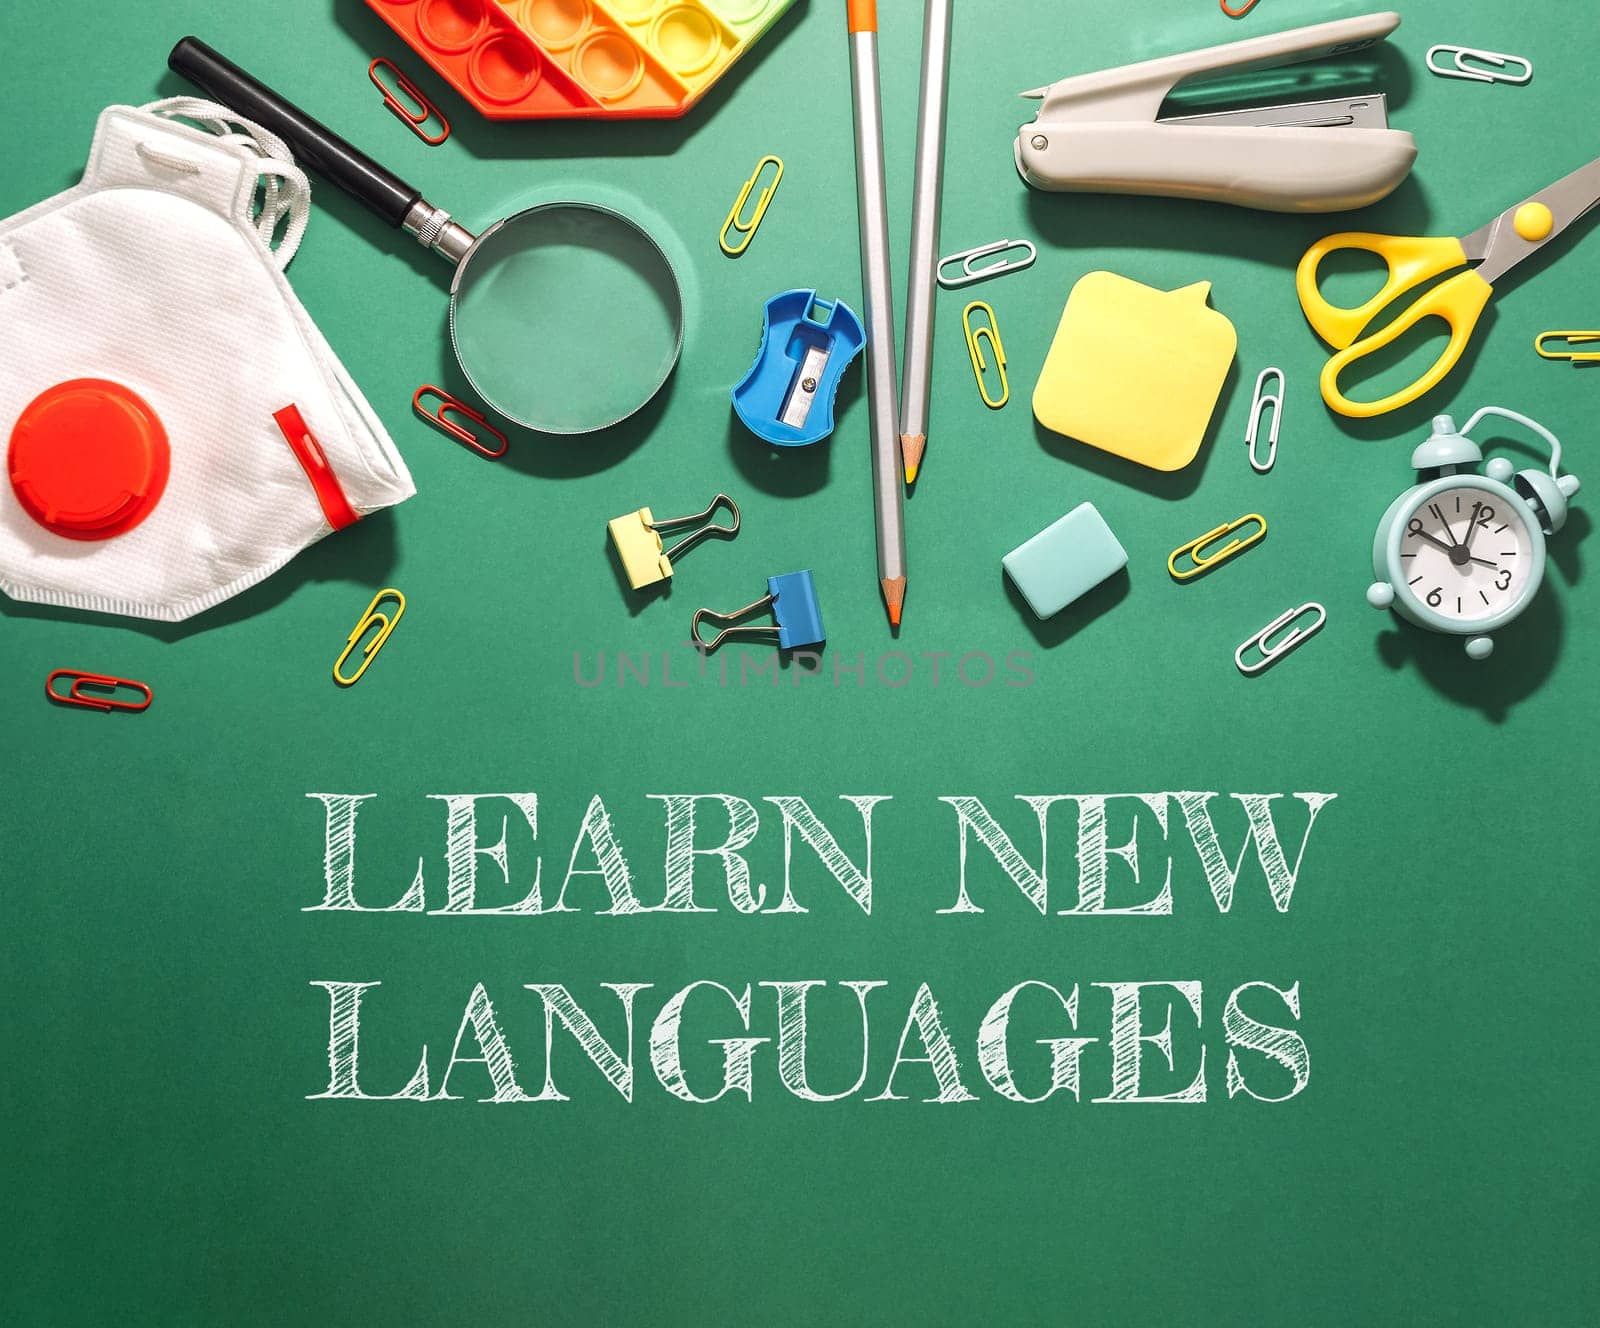 A green background with a white box that says learn new languages. There are many different colored items on the background, including scissors, a magnifying glass, and a clock